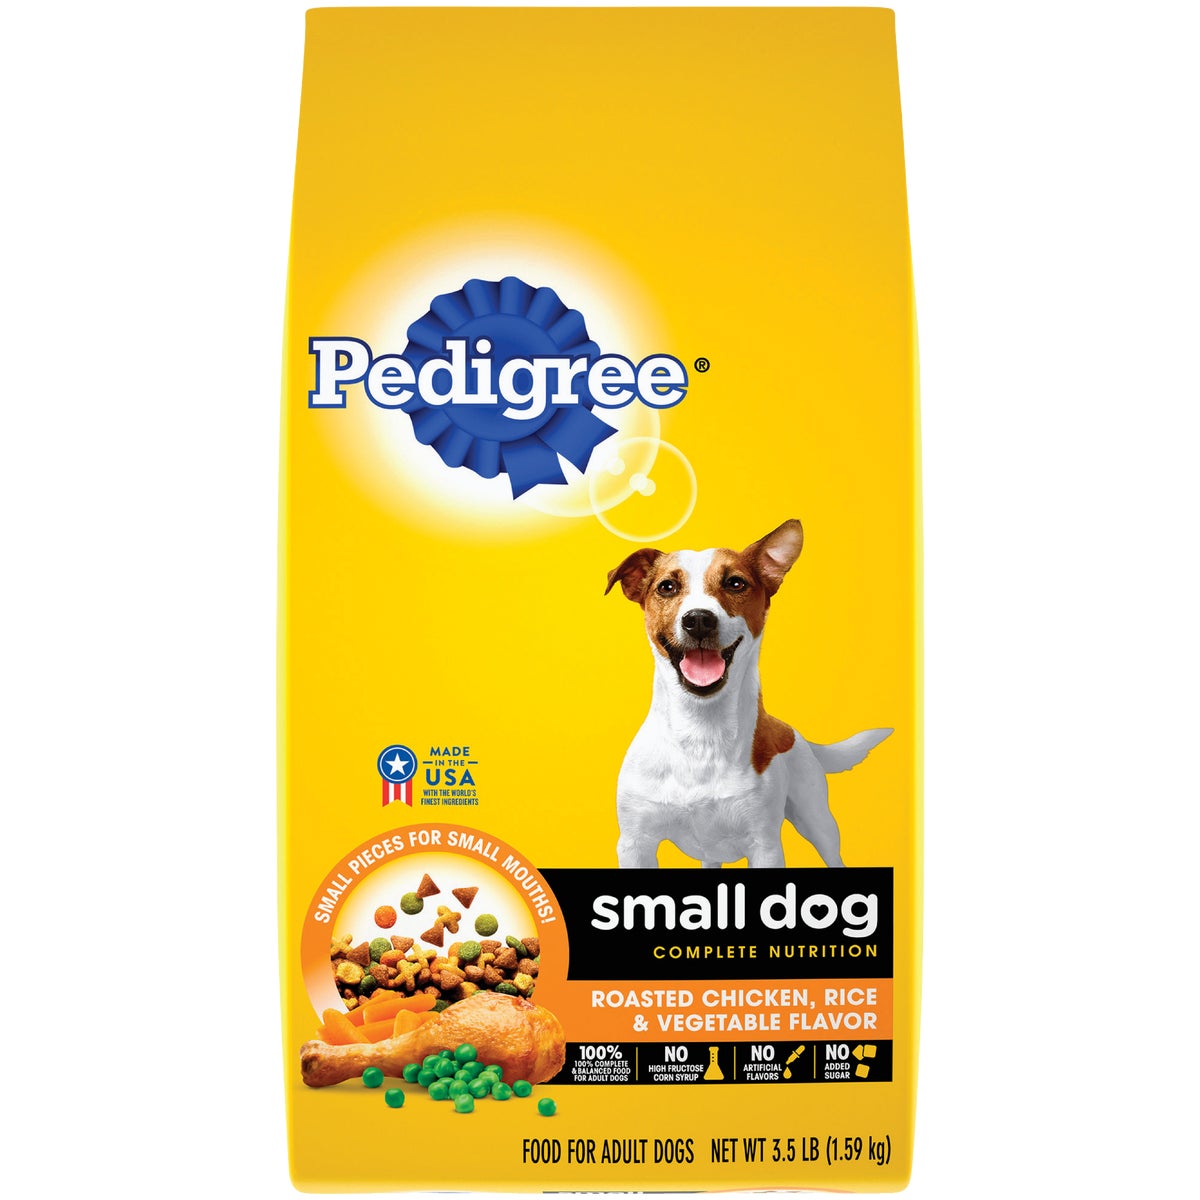 Pedigree Small Dog Complete Nutrition 3.5 Lb. Roasted Chicken, Rice & Vegetable Adult Dry Dog Food